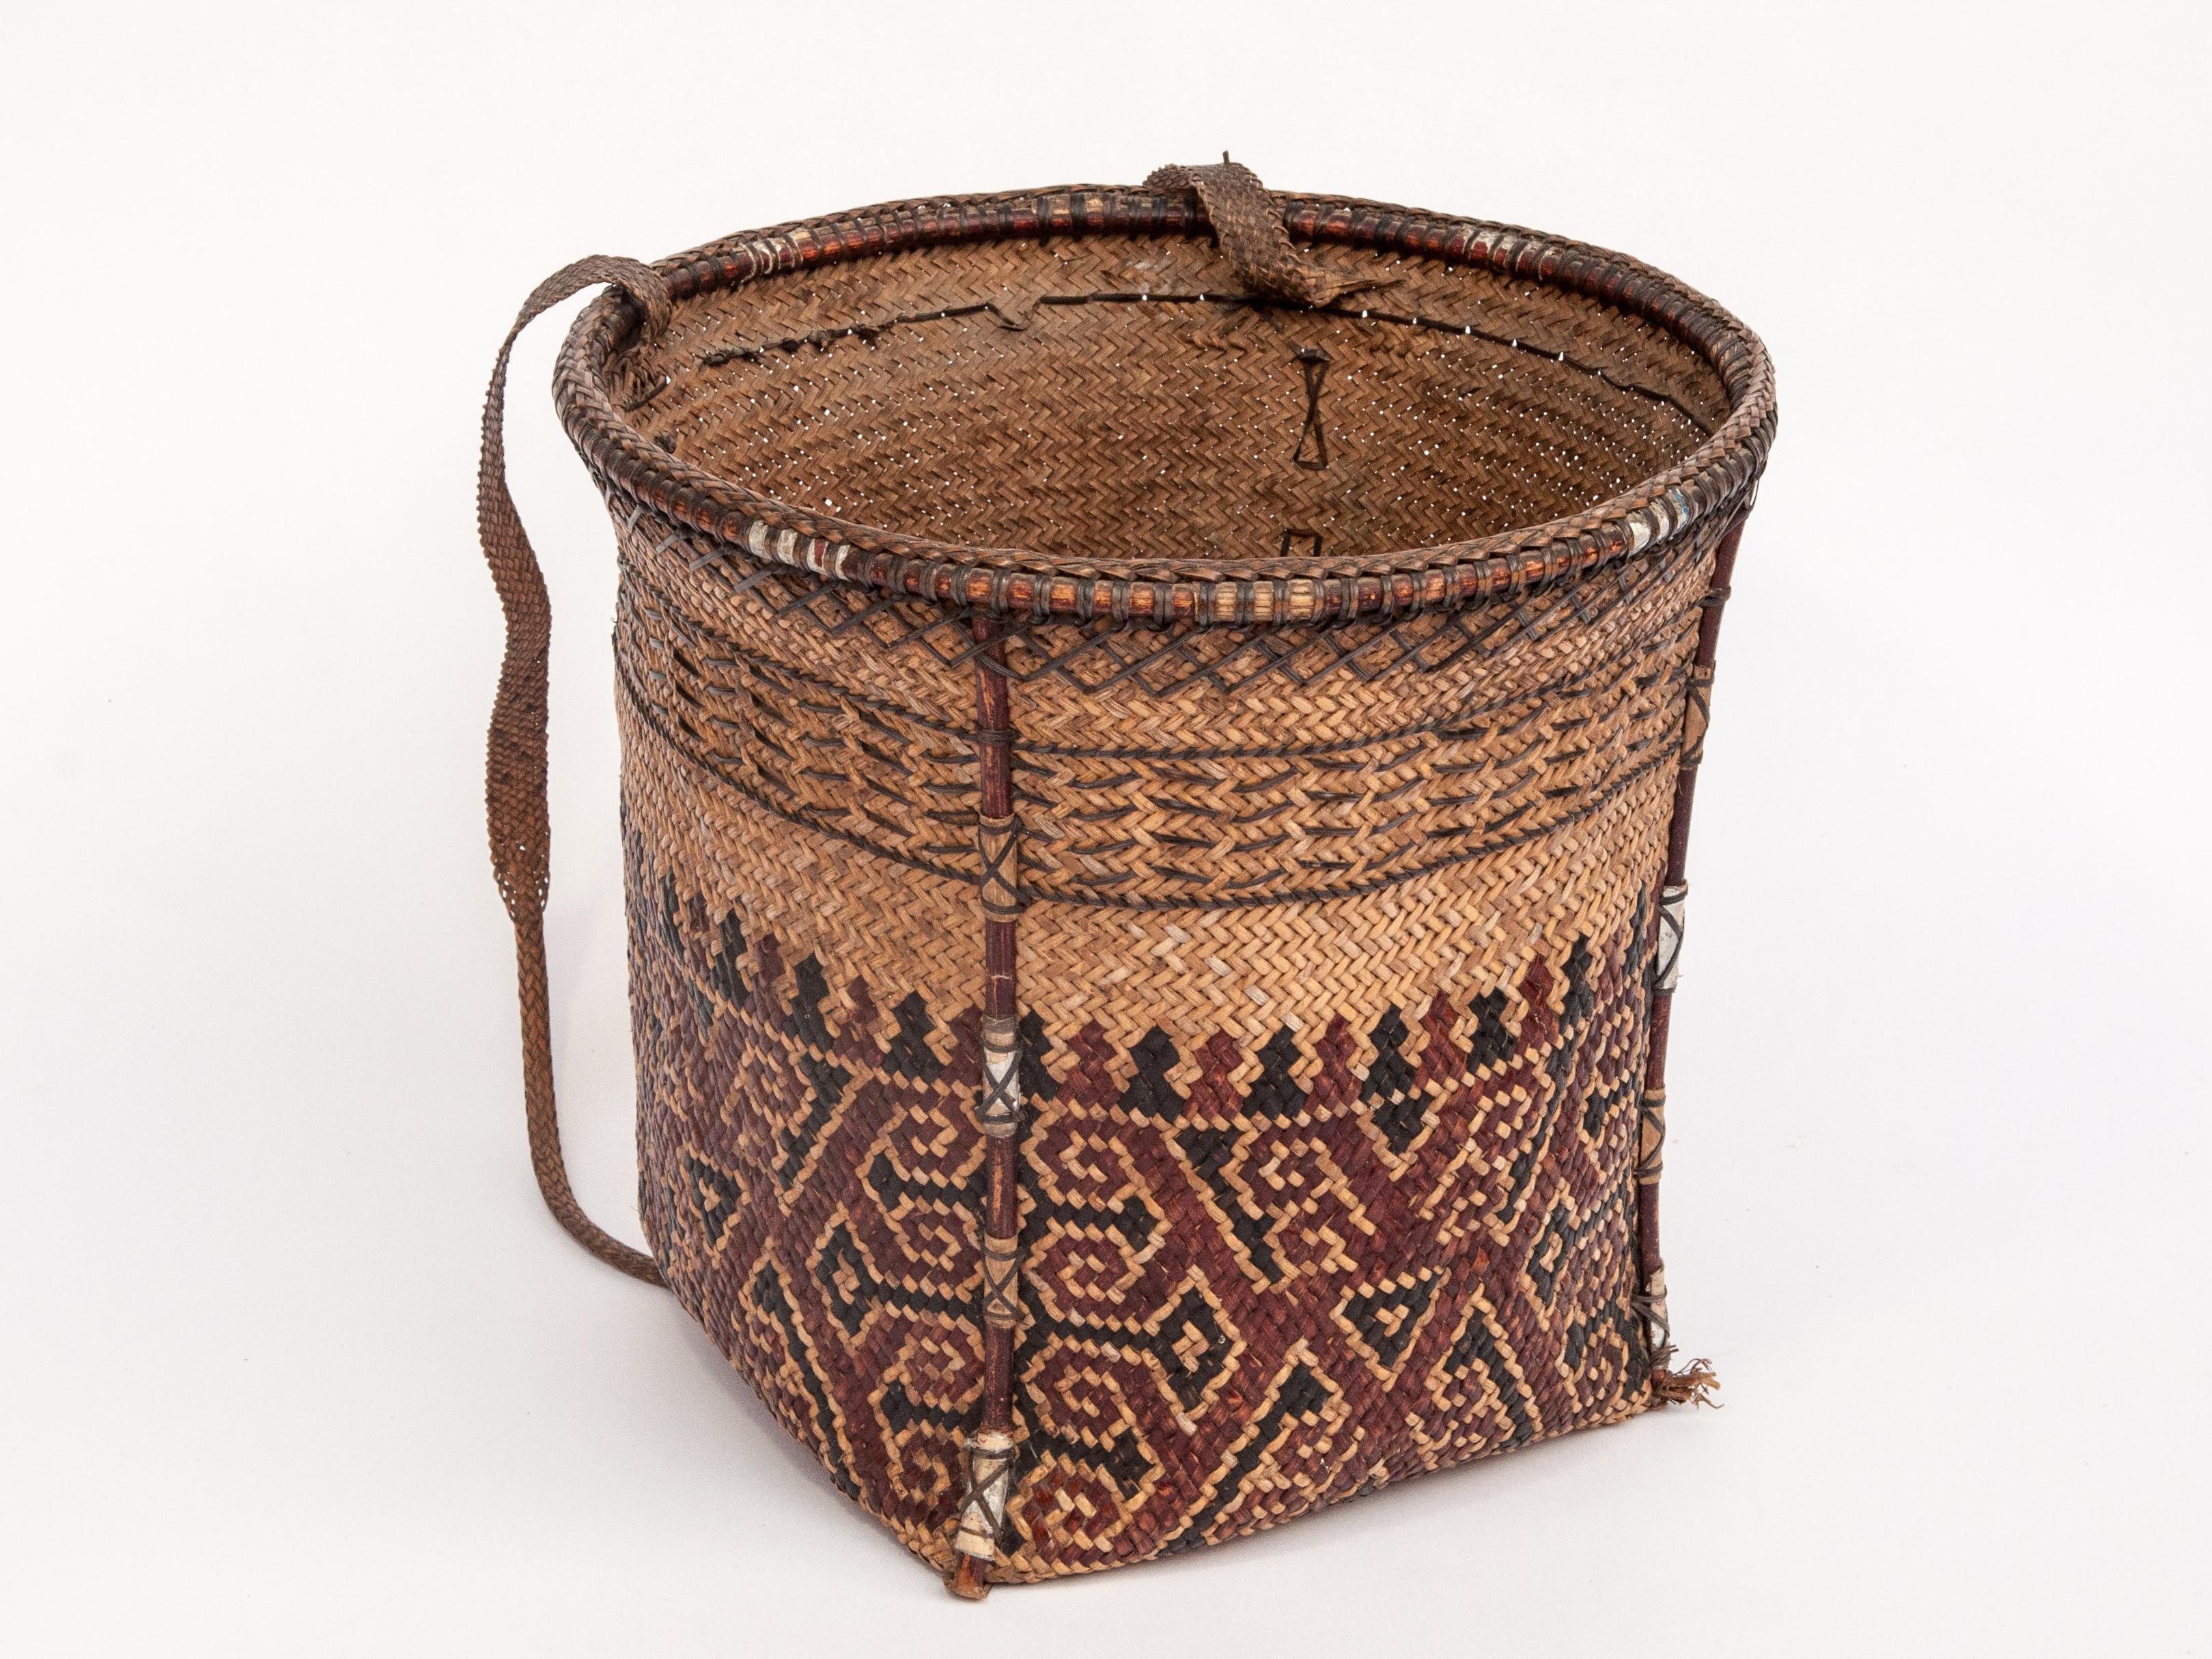 Vintage carrying basket with woven design, Ngaju Dayak of Borneo, mid-20th century.
This small sturdy basket comes from the Ngaju of Central Borneo, and comprises rattan plaiting reinforced with a bamboo rim and splines. The design incorporates